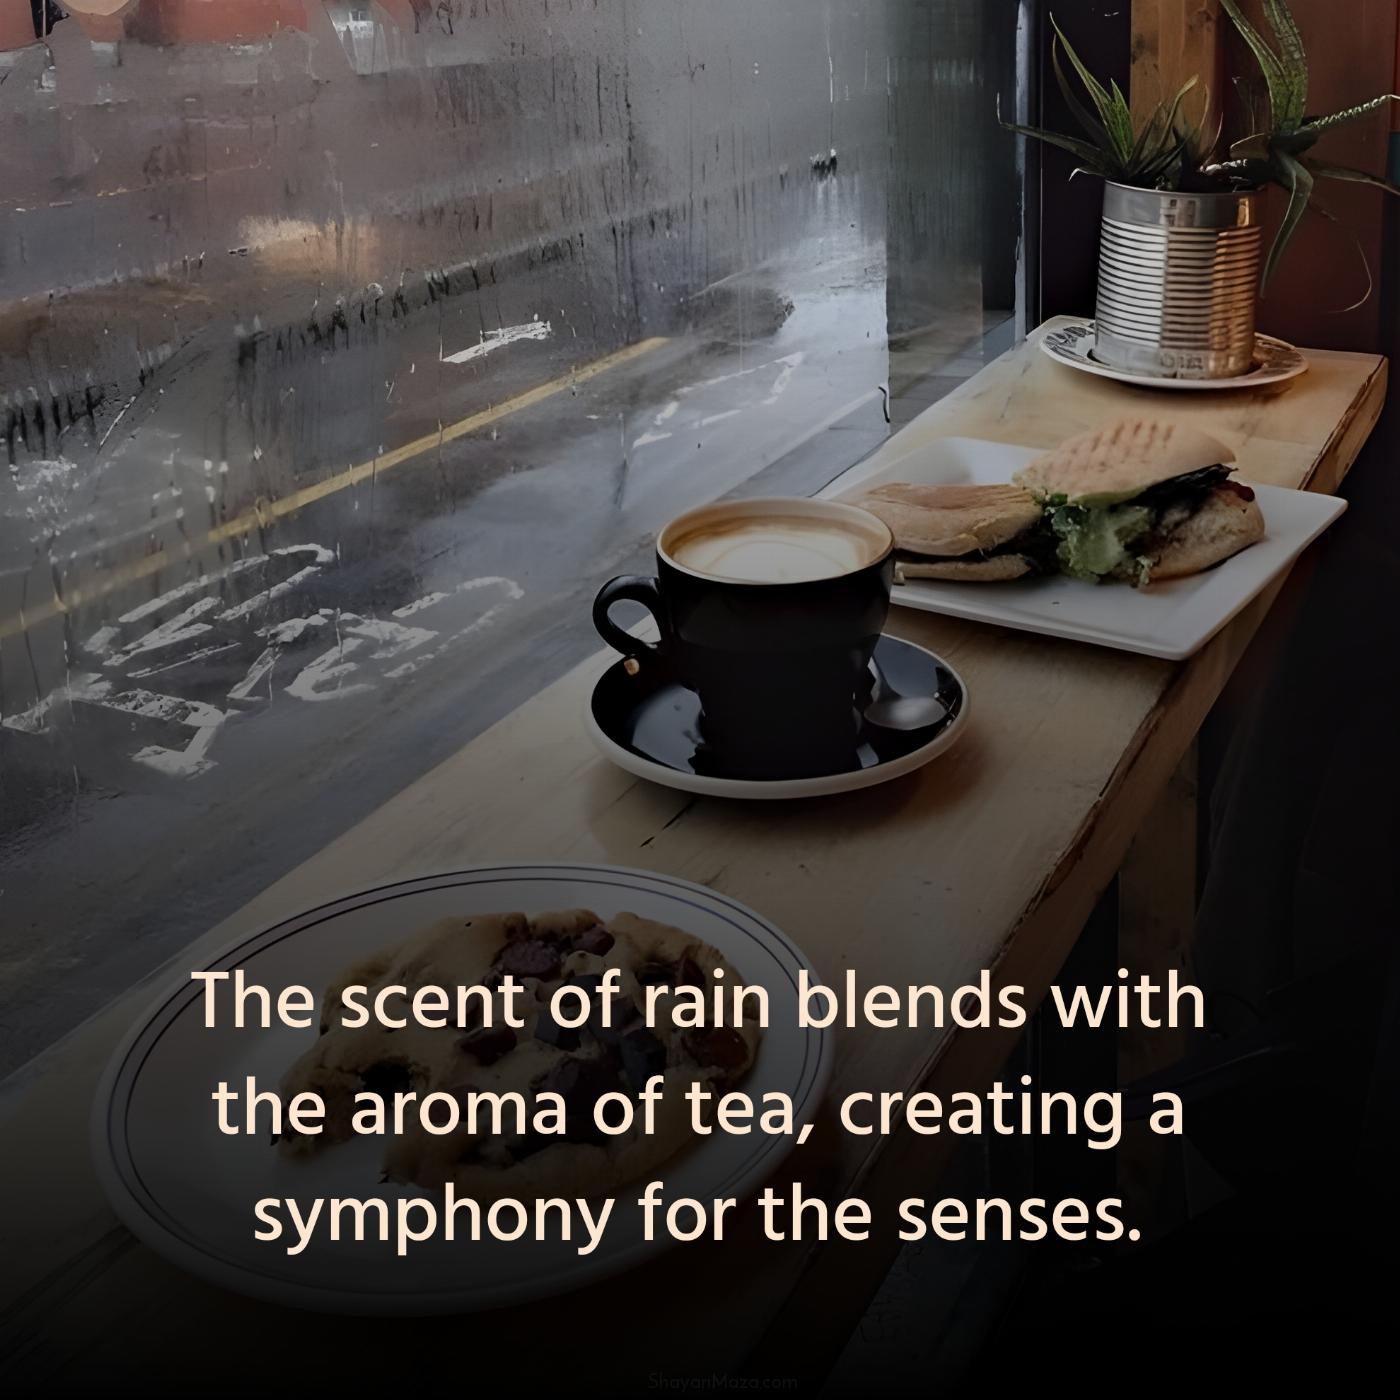 The scent of rain blends with the aroma of tea